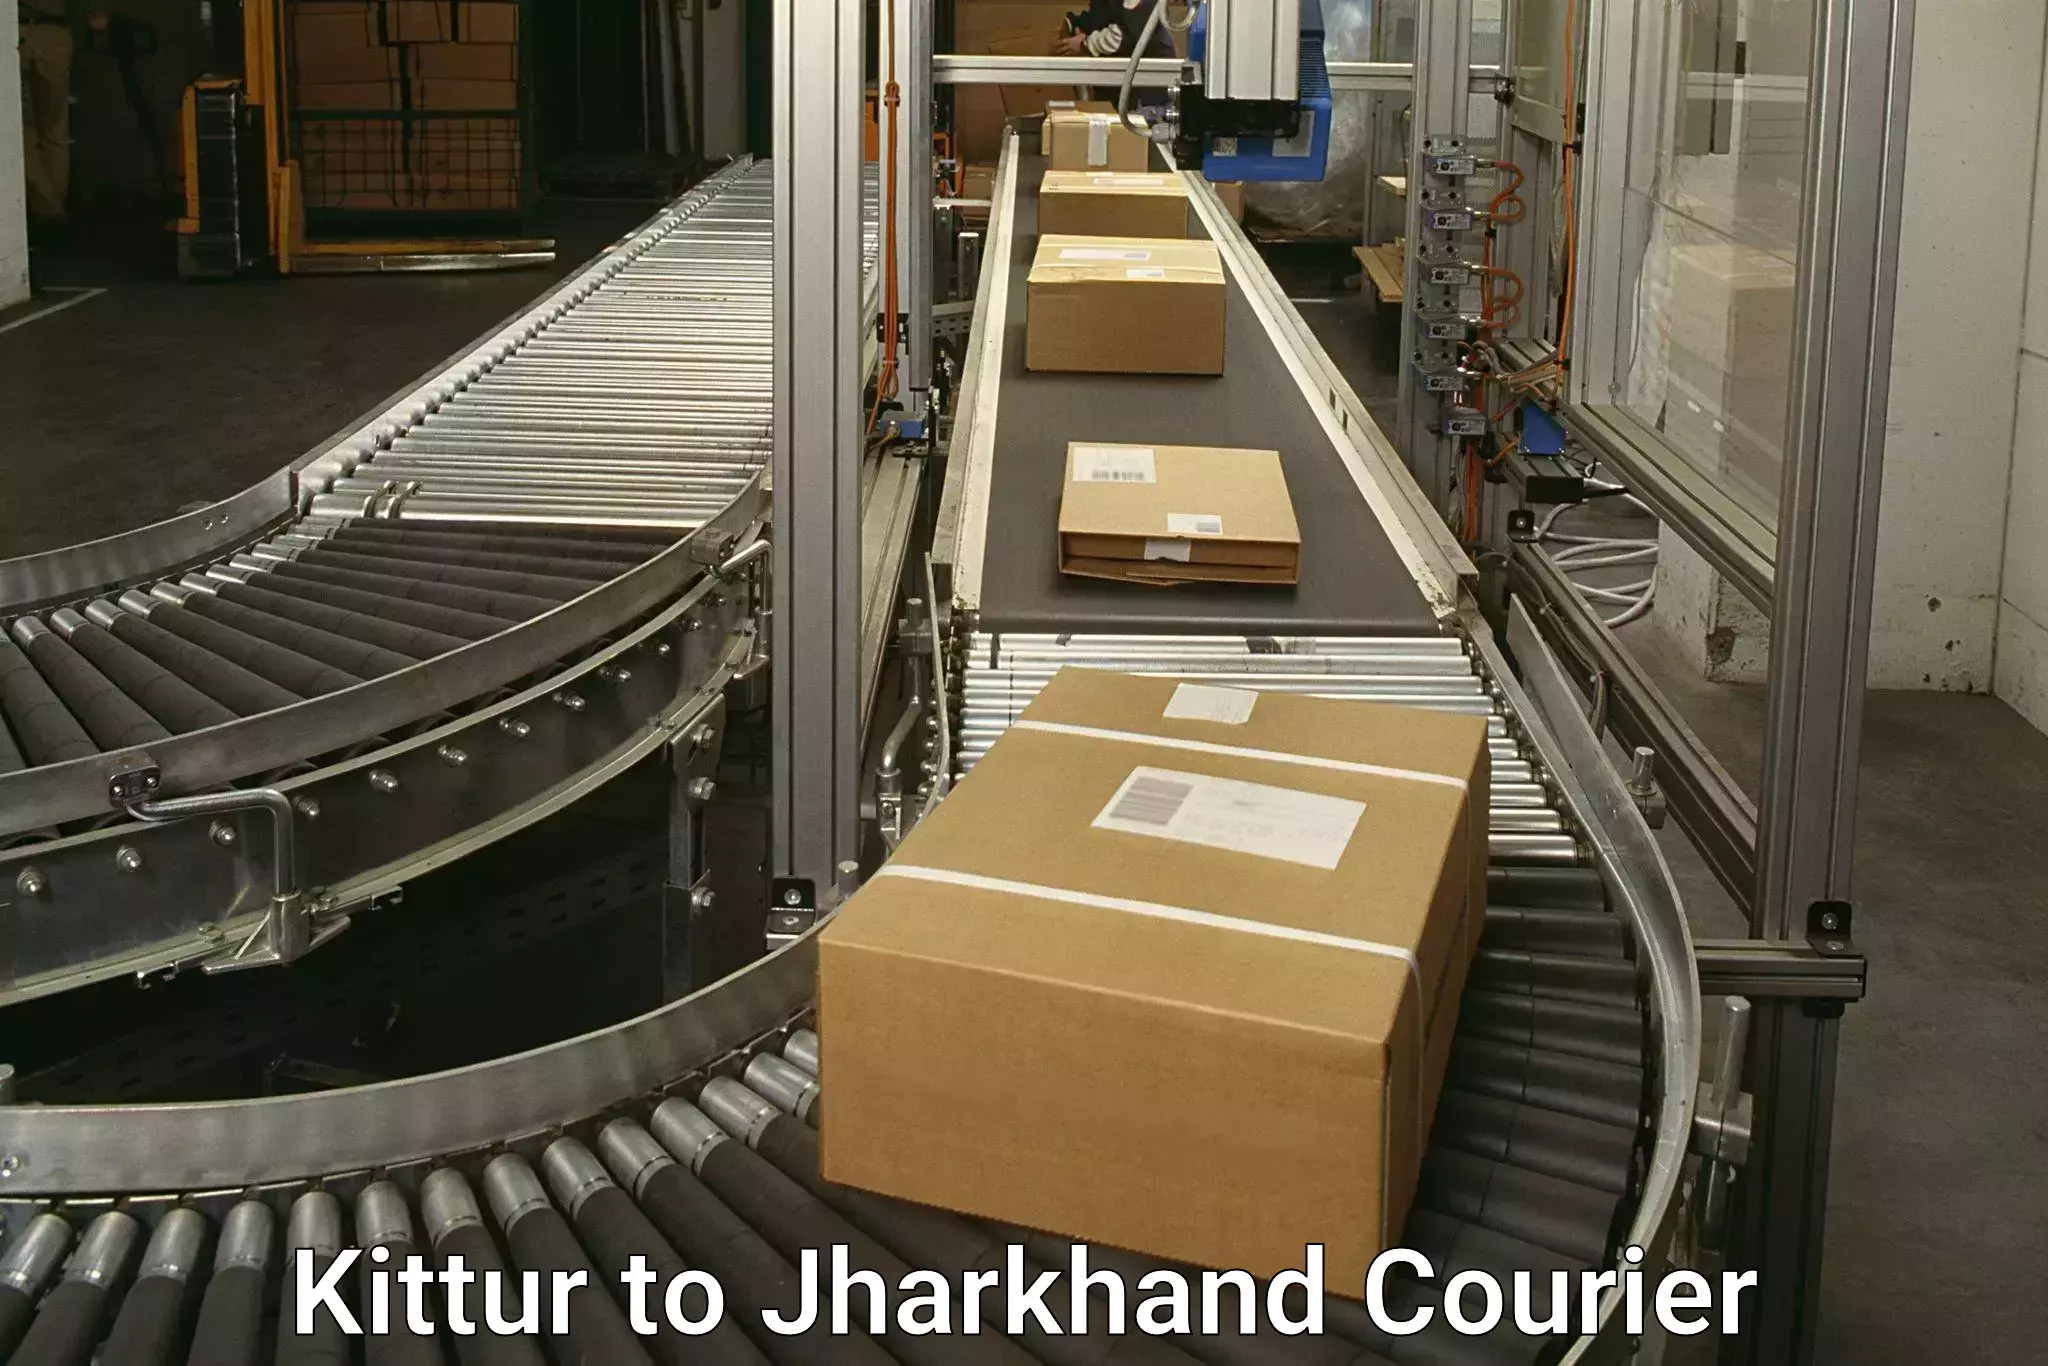 Multi-national courier services Kittur to Chakradharpur